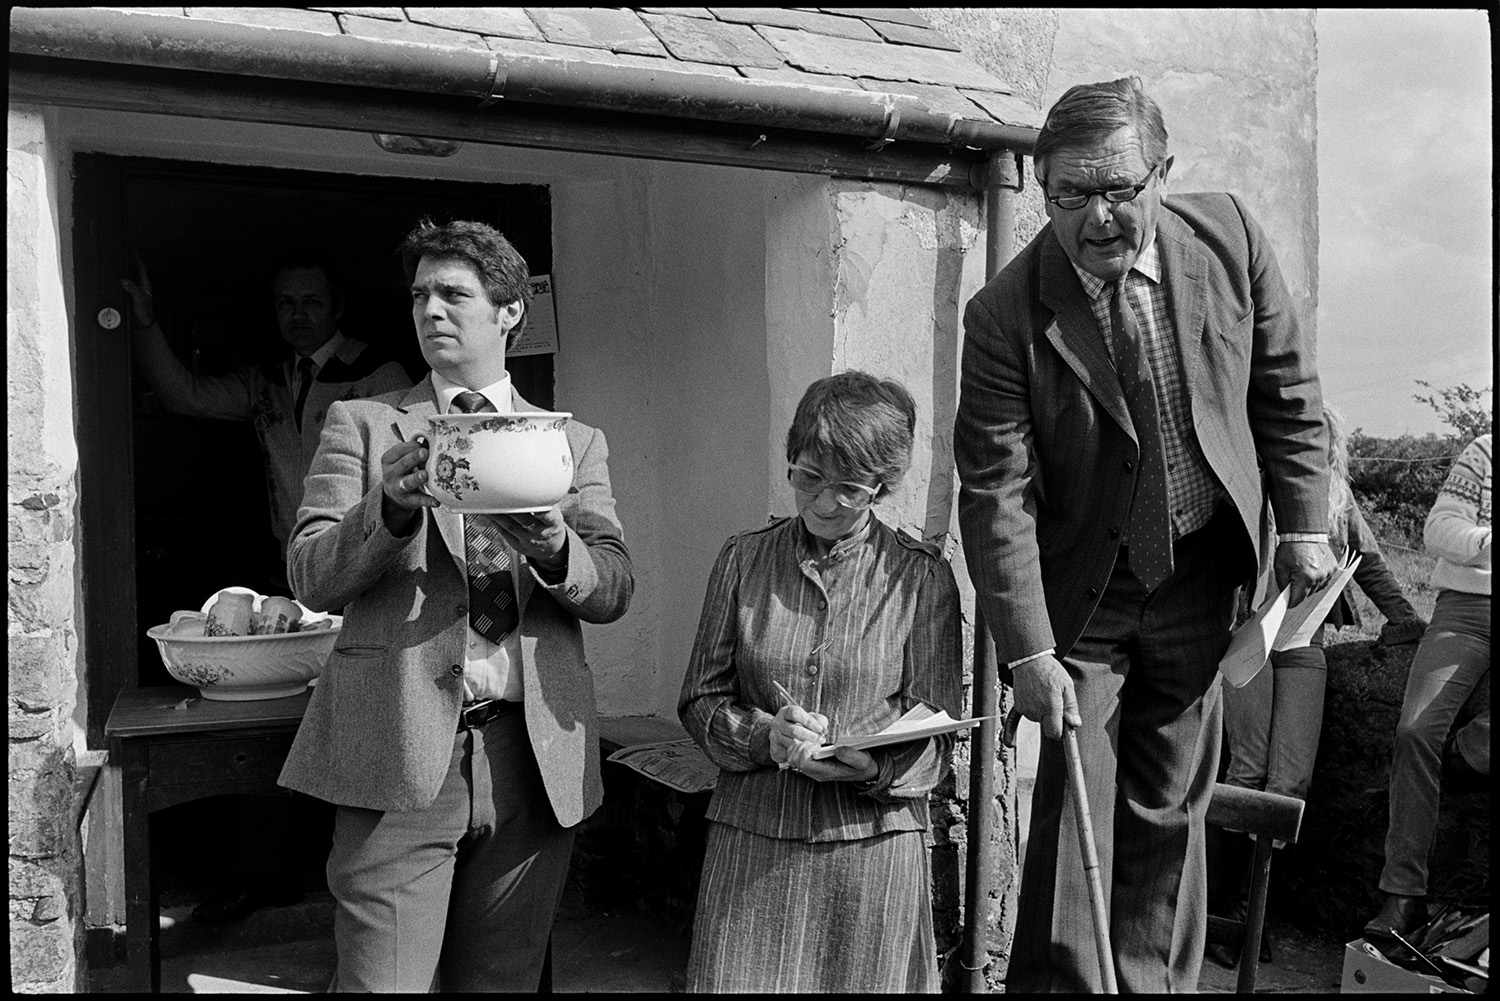 House auction, auctioneer standing on chair selling, man peering into house. Pot.
[A house auction at Roborough. Auctioneer Paul Foggo, is standing on a chair in front of the porch. He is holding a walking stick and selling items. Diane Foggo is writing notes. Another man is holding up a chamber pot for bids. A table with a bowl and china stands in the porch doorway.]